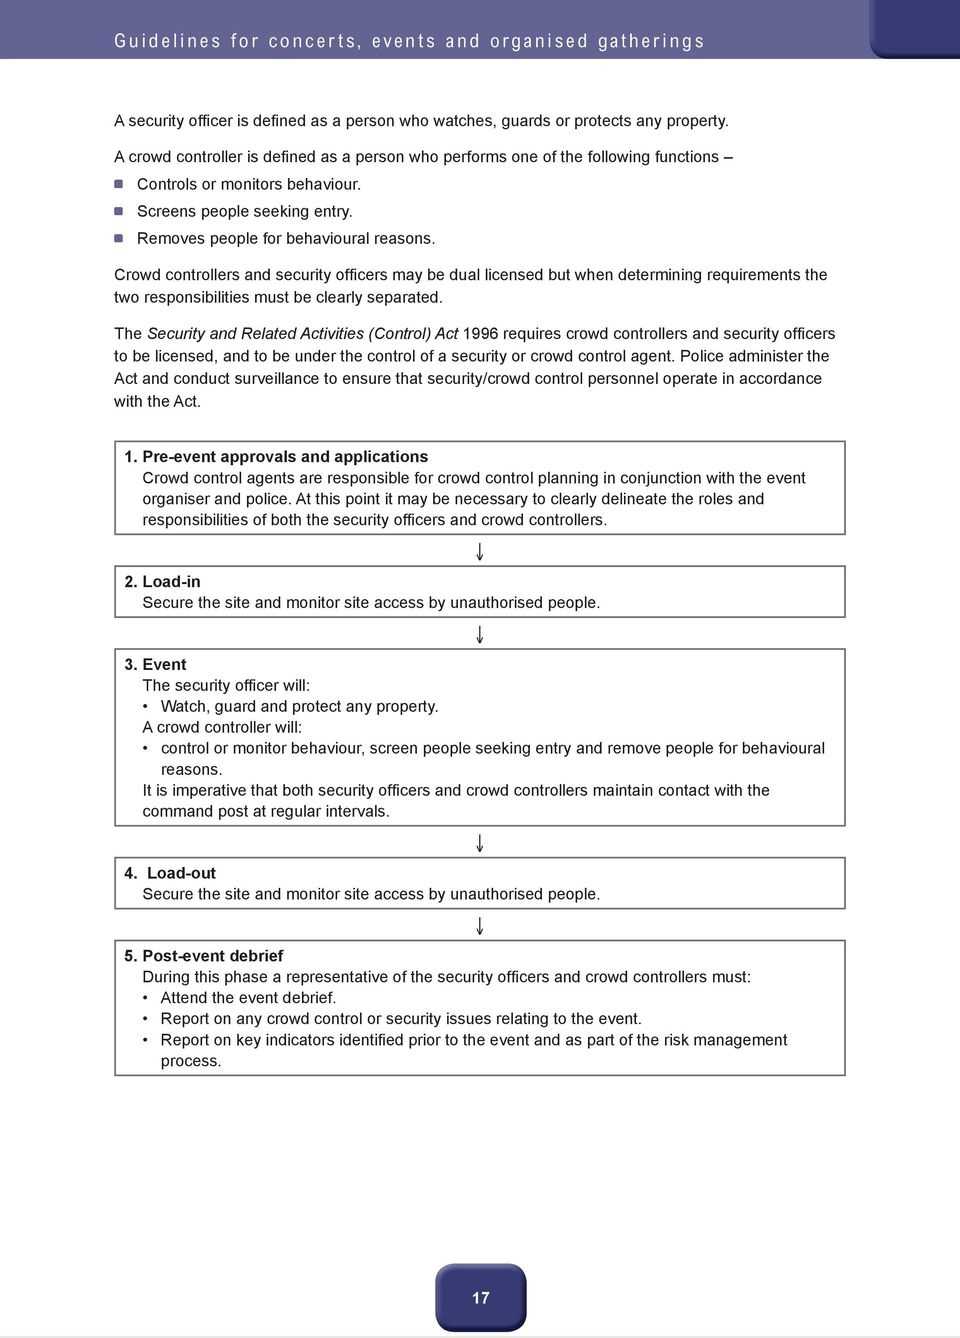 Guidelines For Concerts, Events And Organised Gatherings Intended For Event Debrief Report Template